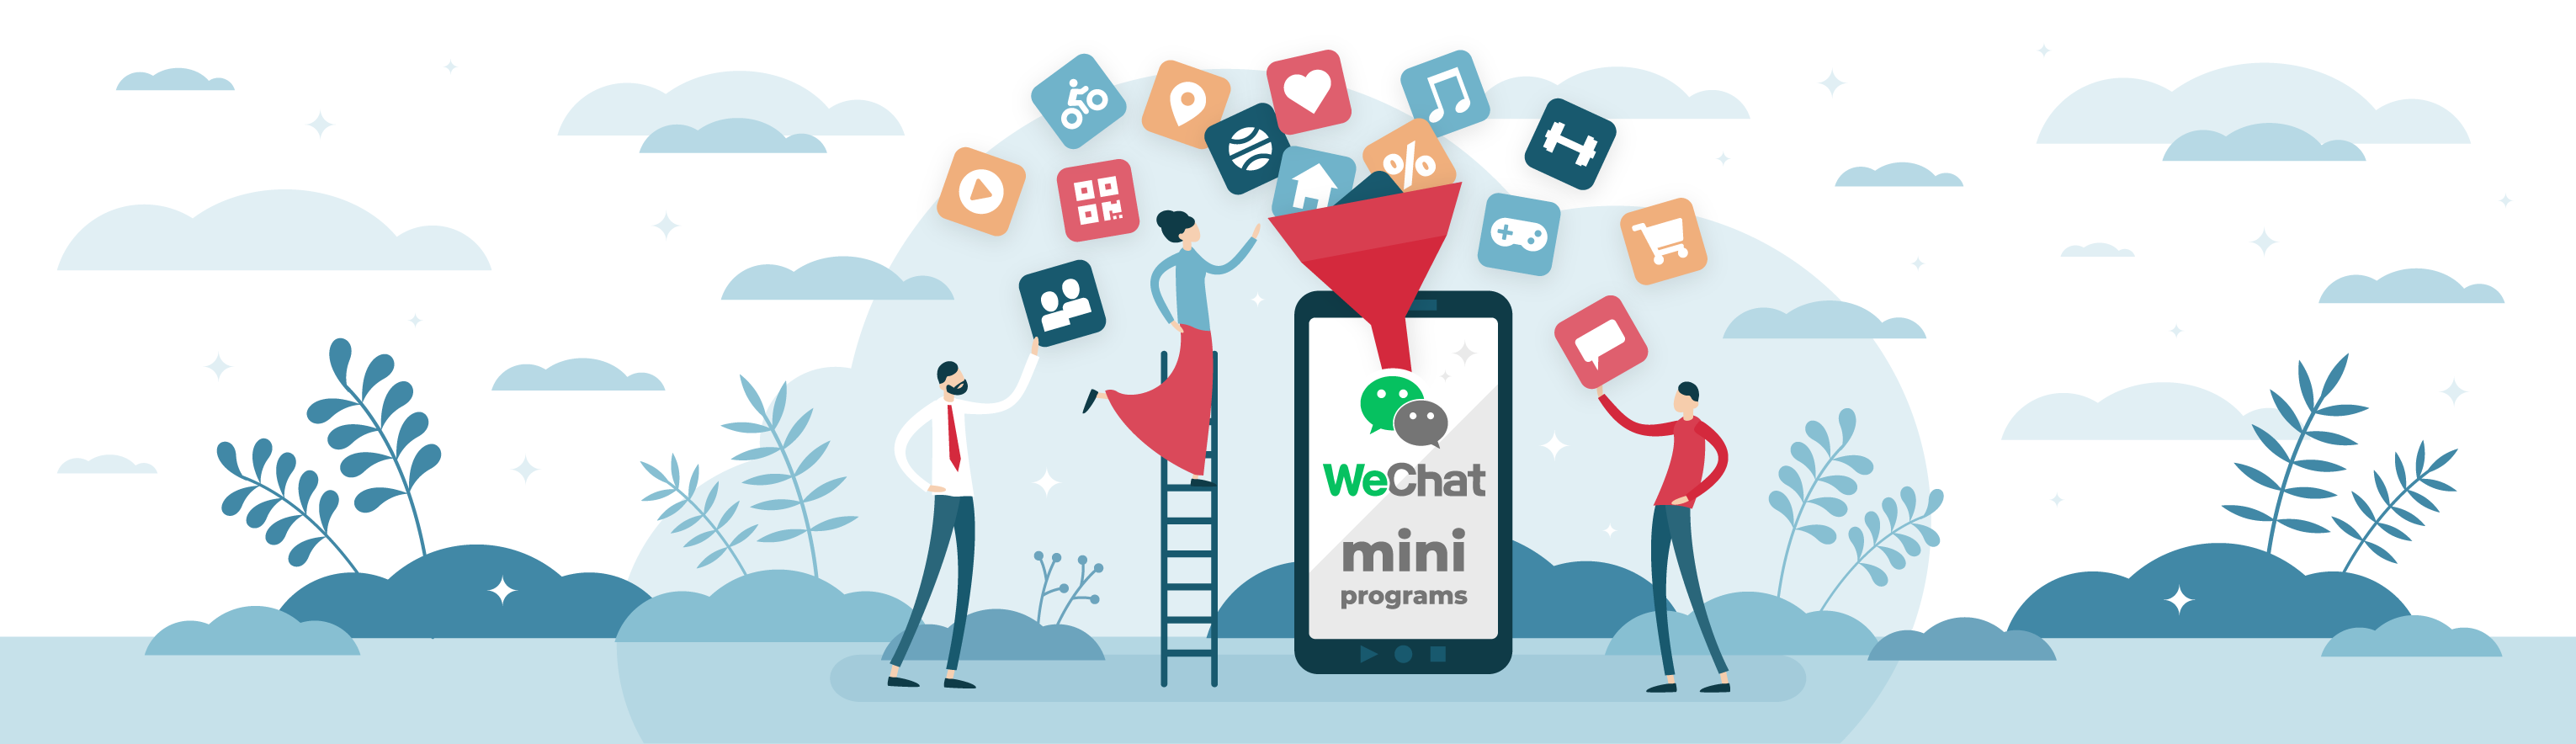 What are WeChat mini programs?